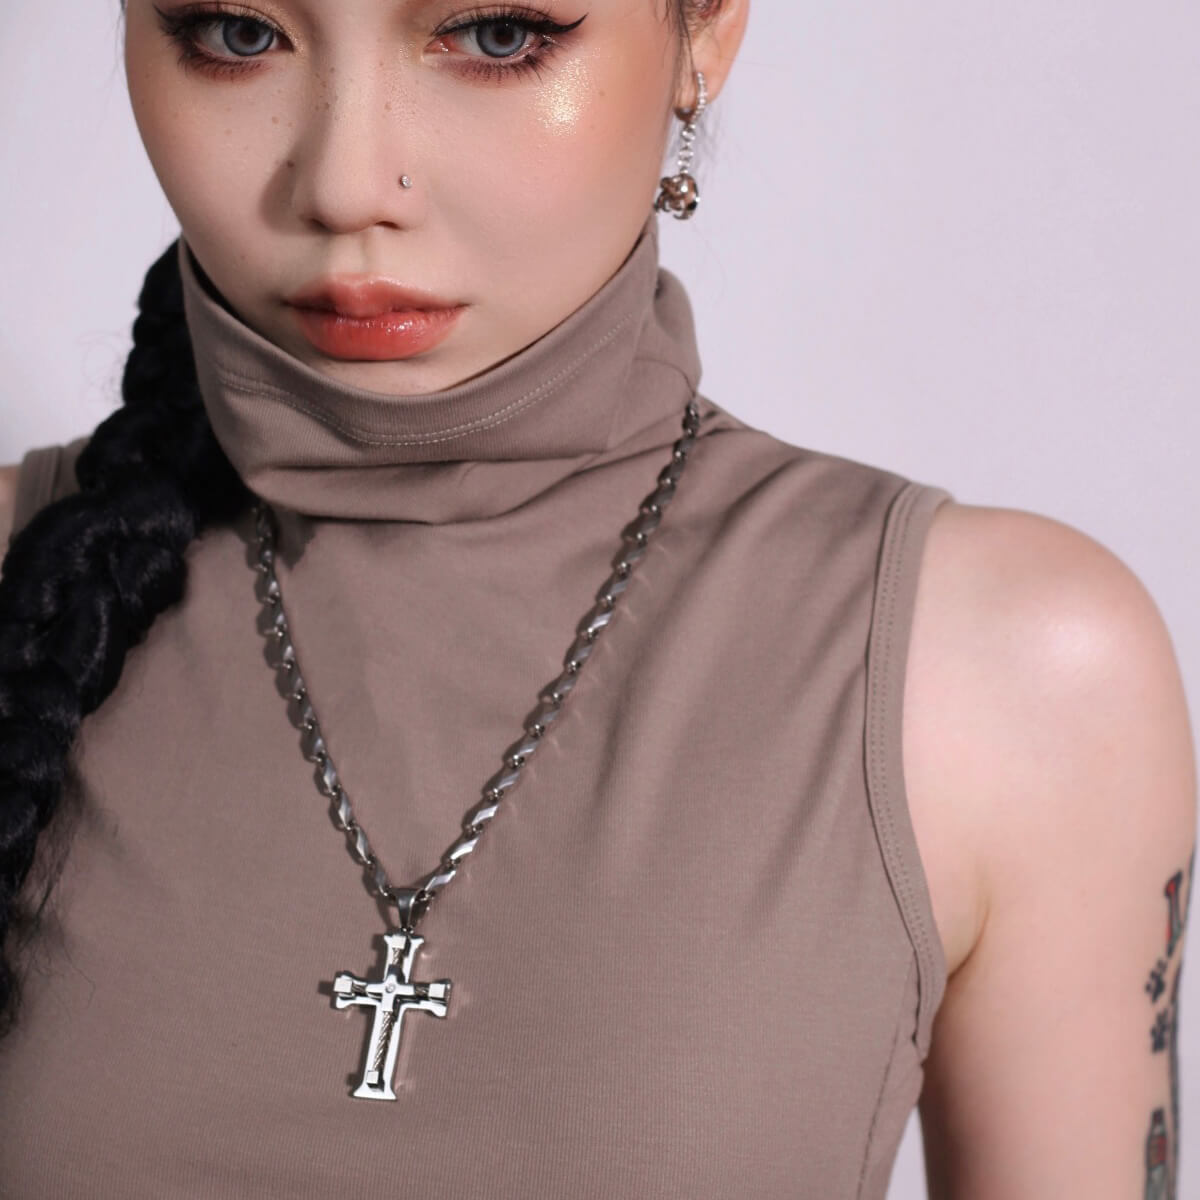 Hip-Hop Style Cross Necklace | Buy at Khanie